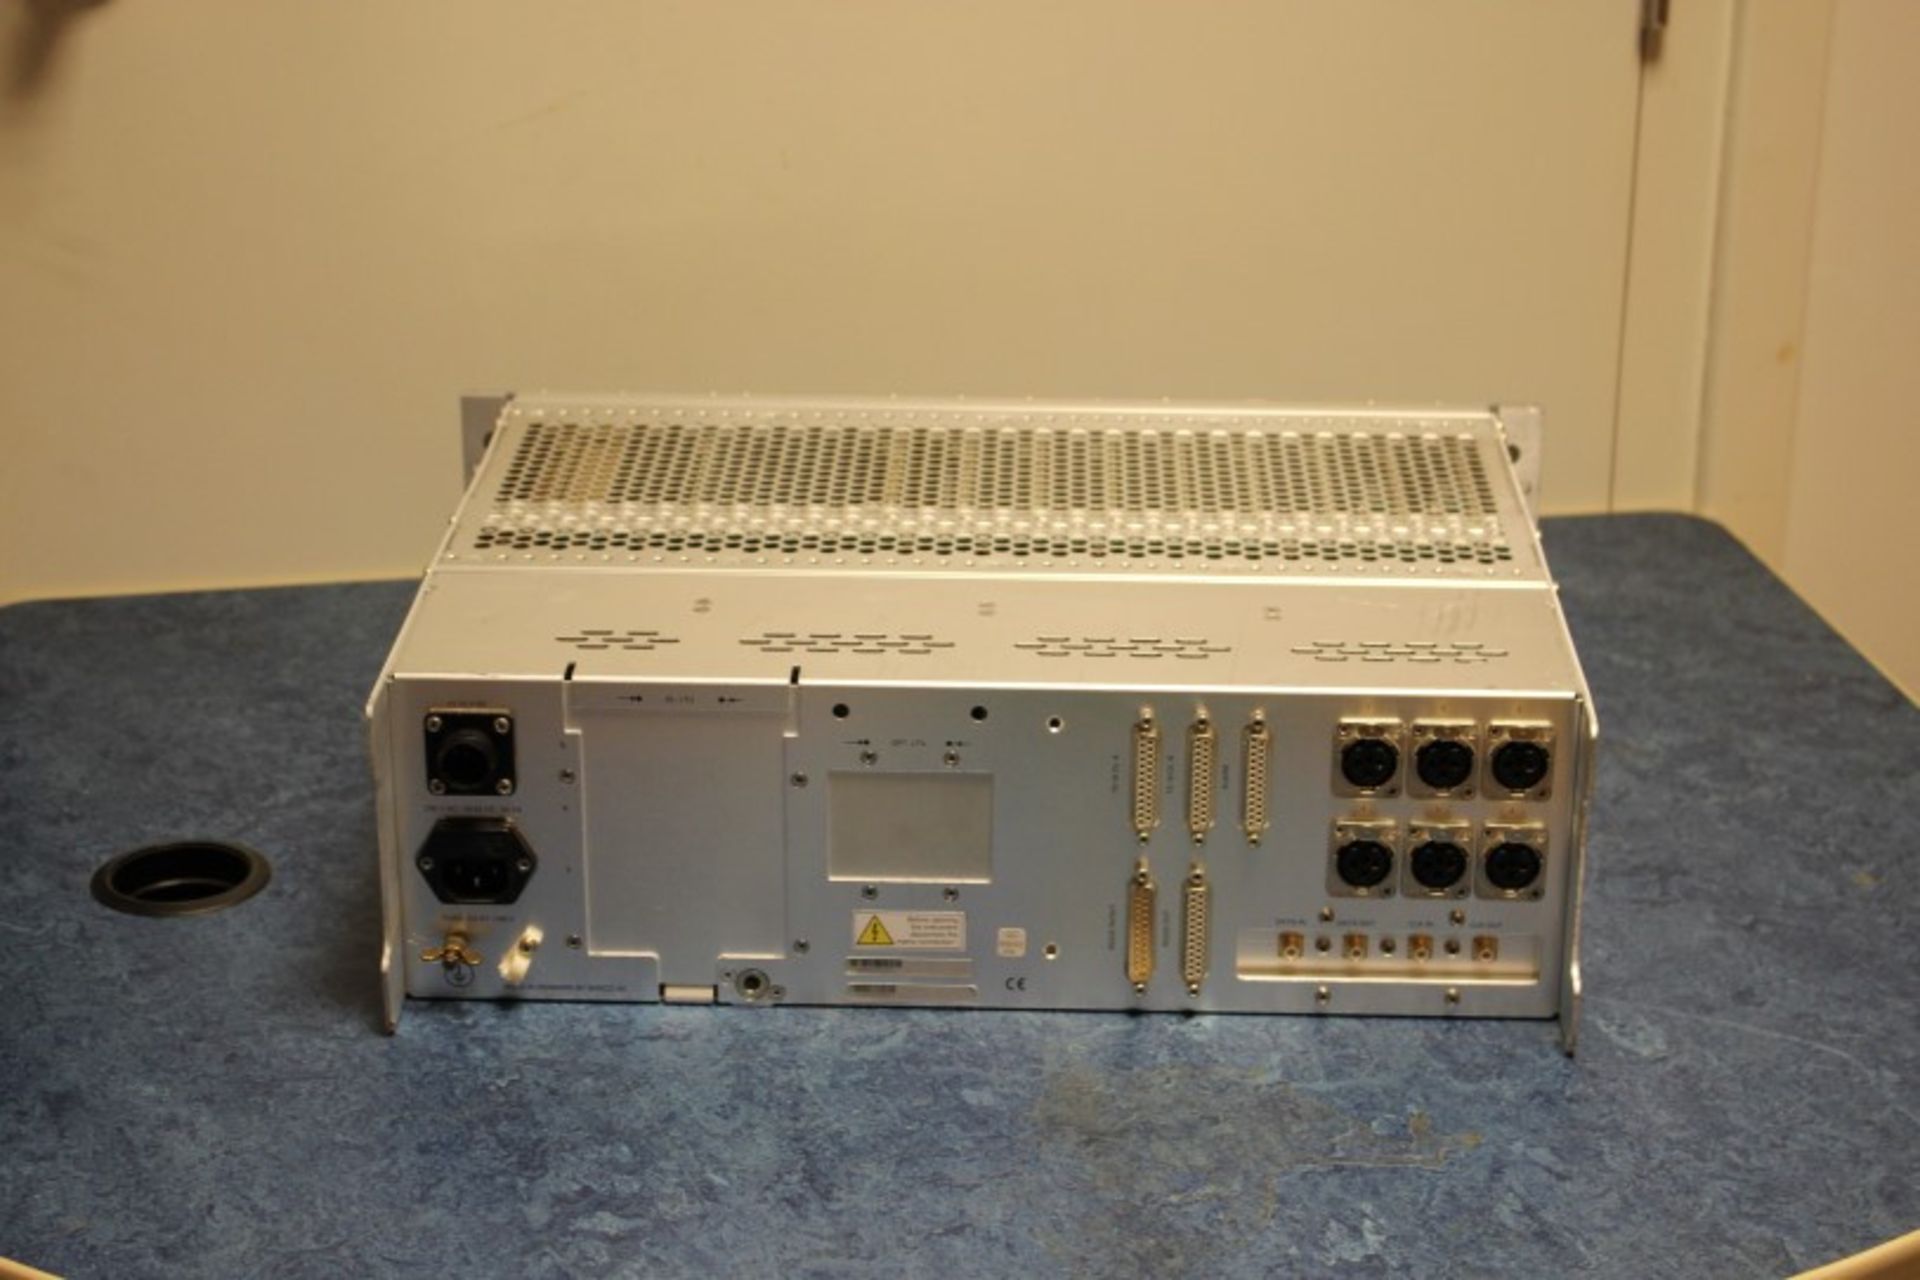 BT 2Mbit/s ADV CODEC RE 8930 + Short form manual, 3 x RE 823-21 AUDIO DAC, 3 x BLANK, RE 824-3- - Image 2 of 2